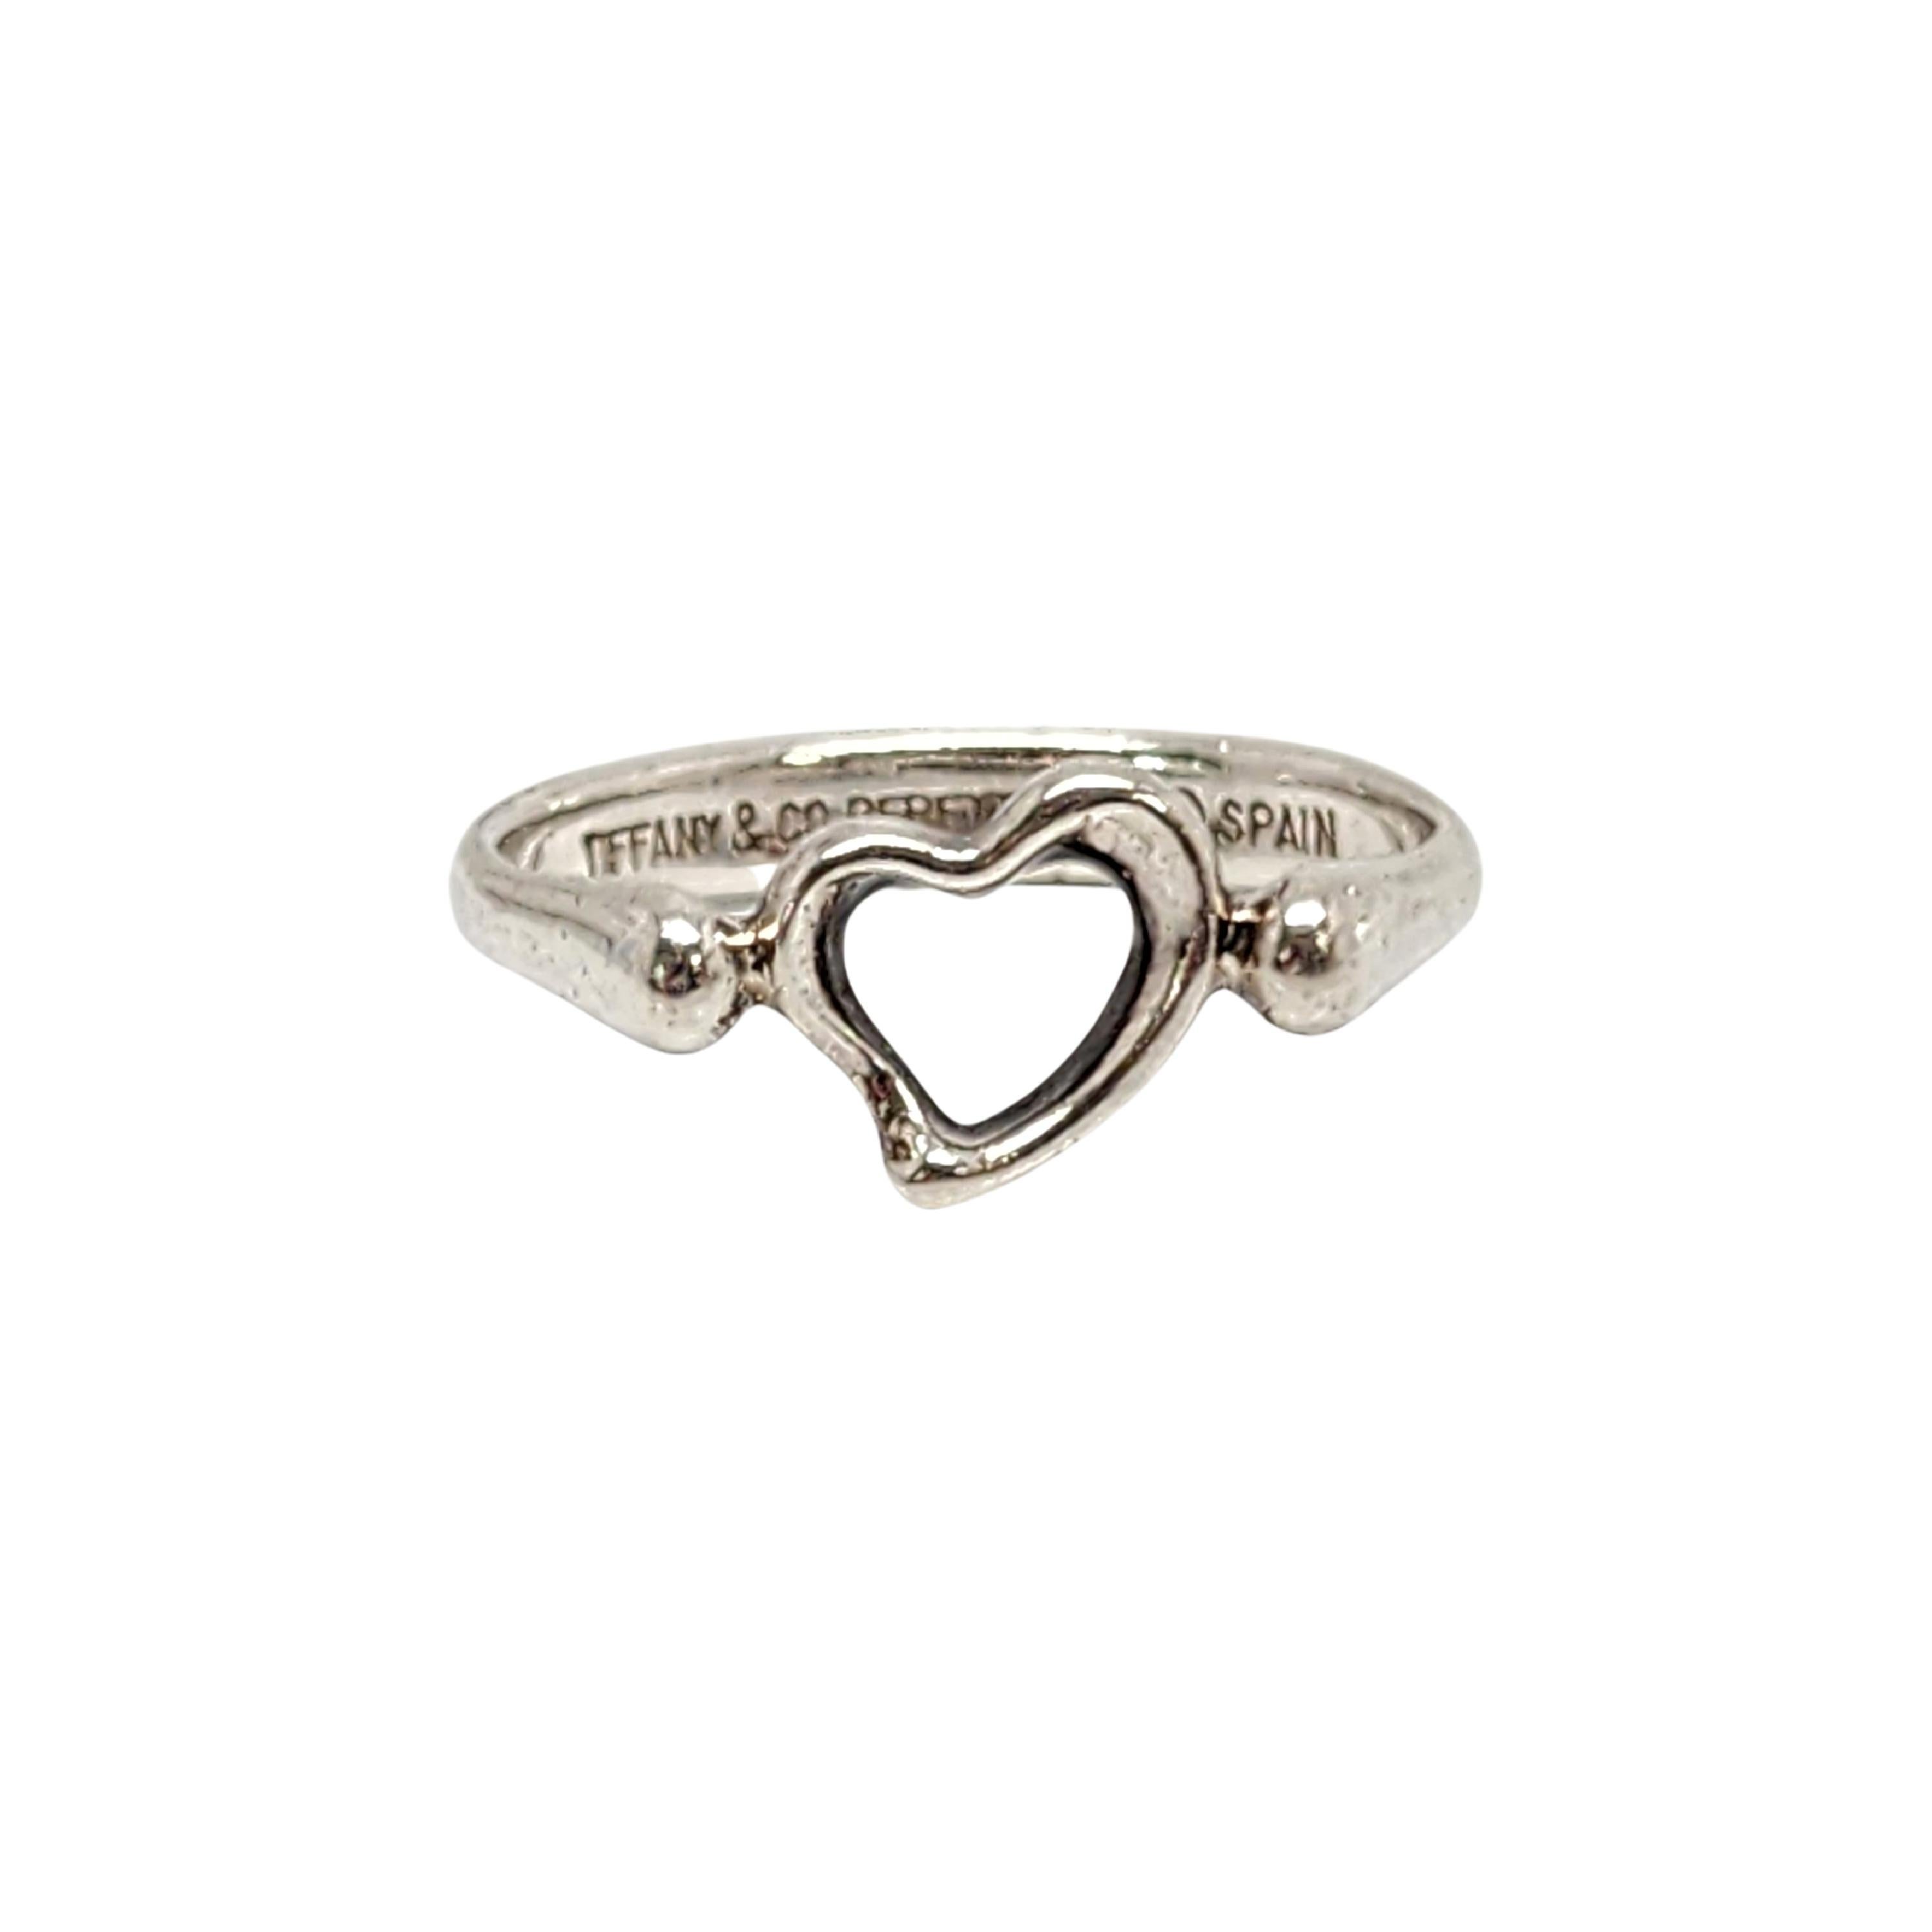 Tiffany & Co sterling silver Open Heart ring designed by Elsa Peretti.

Size 4 1/2

Authentic Tiffany ring featuring Elsa Peretti's signature open heart design. Tiffany pouch and box are not included.

Measures approx 3/8